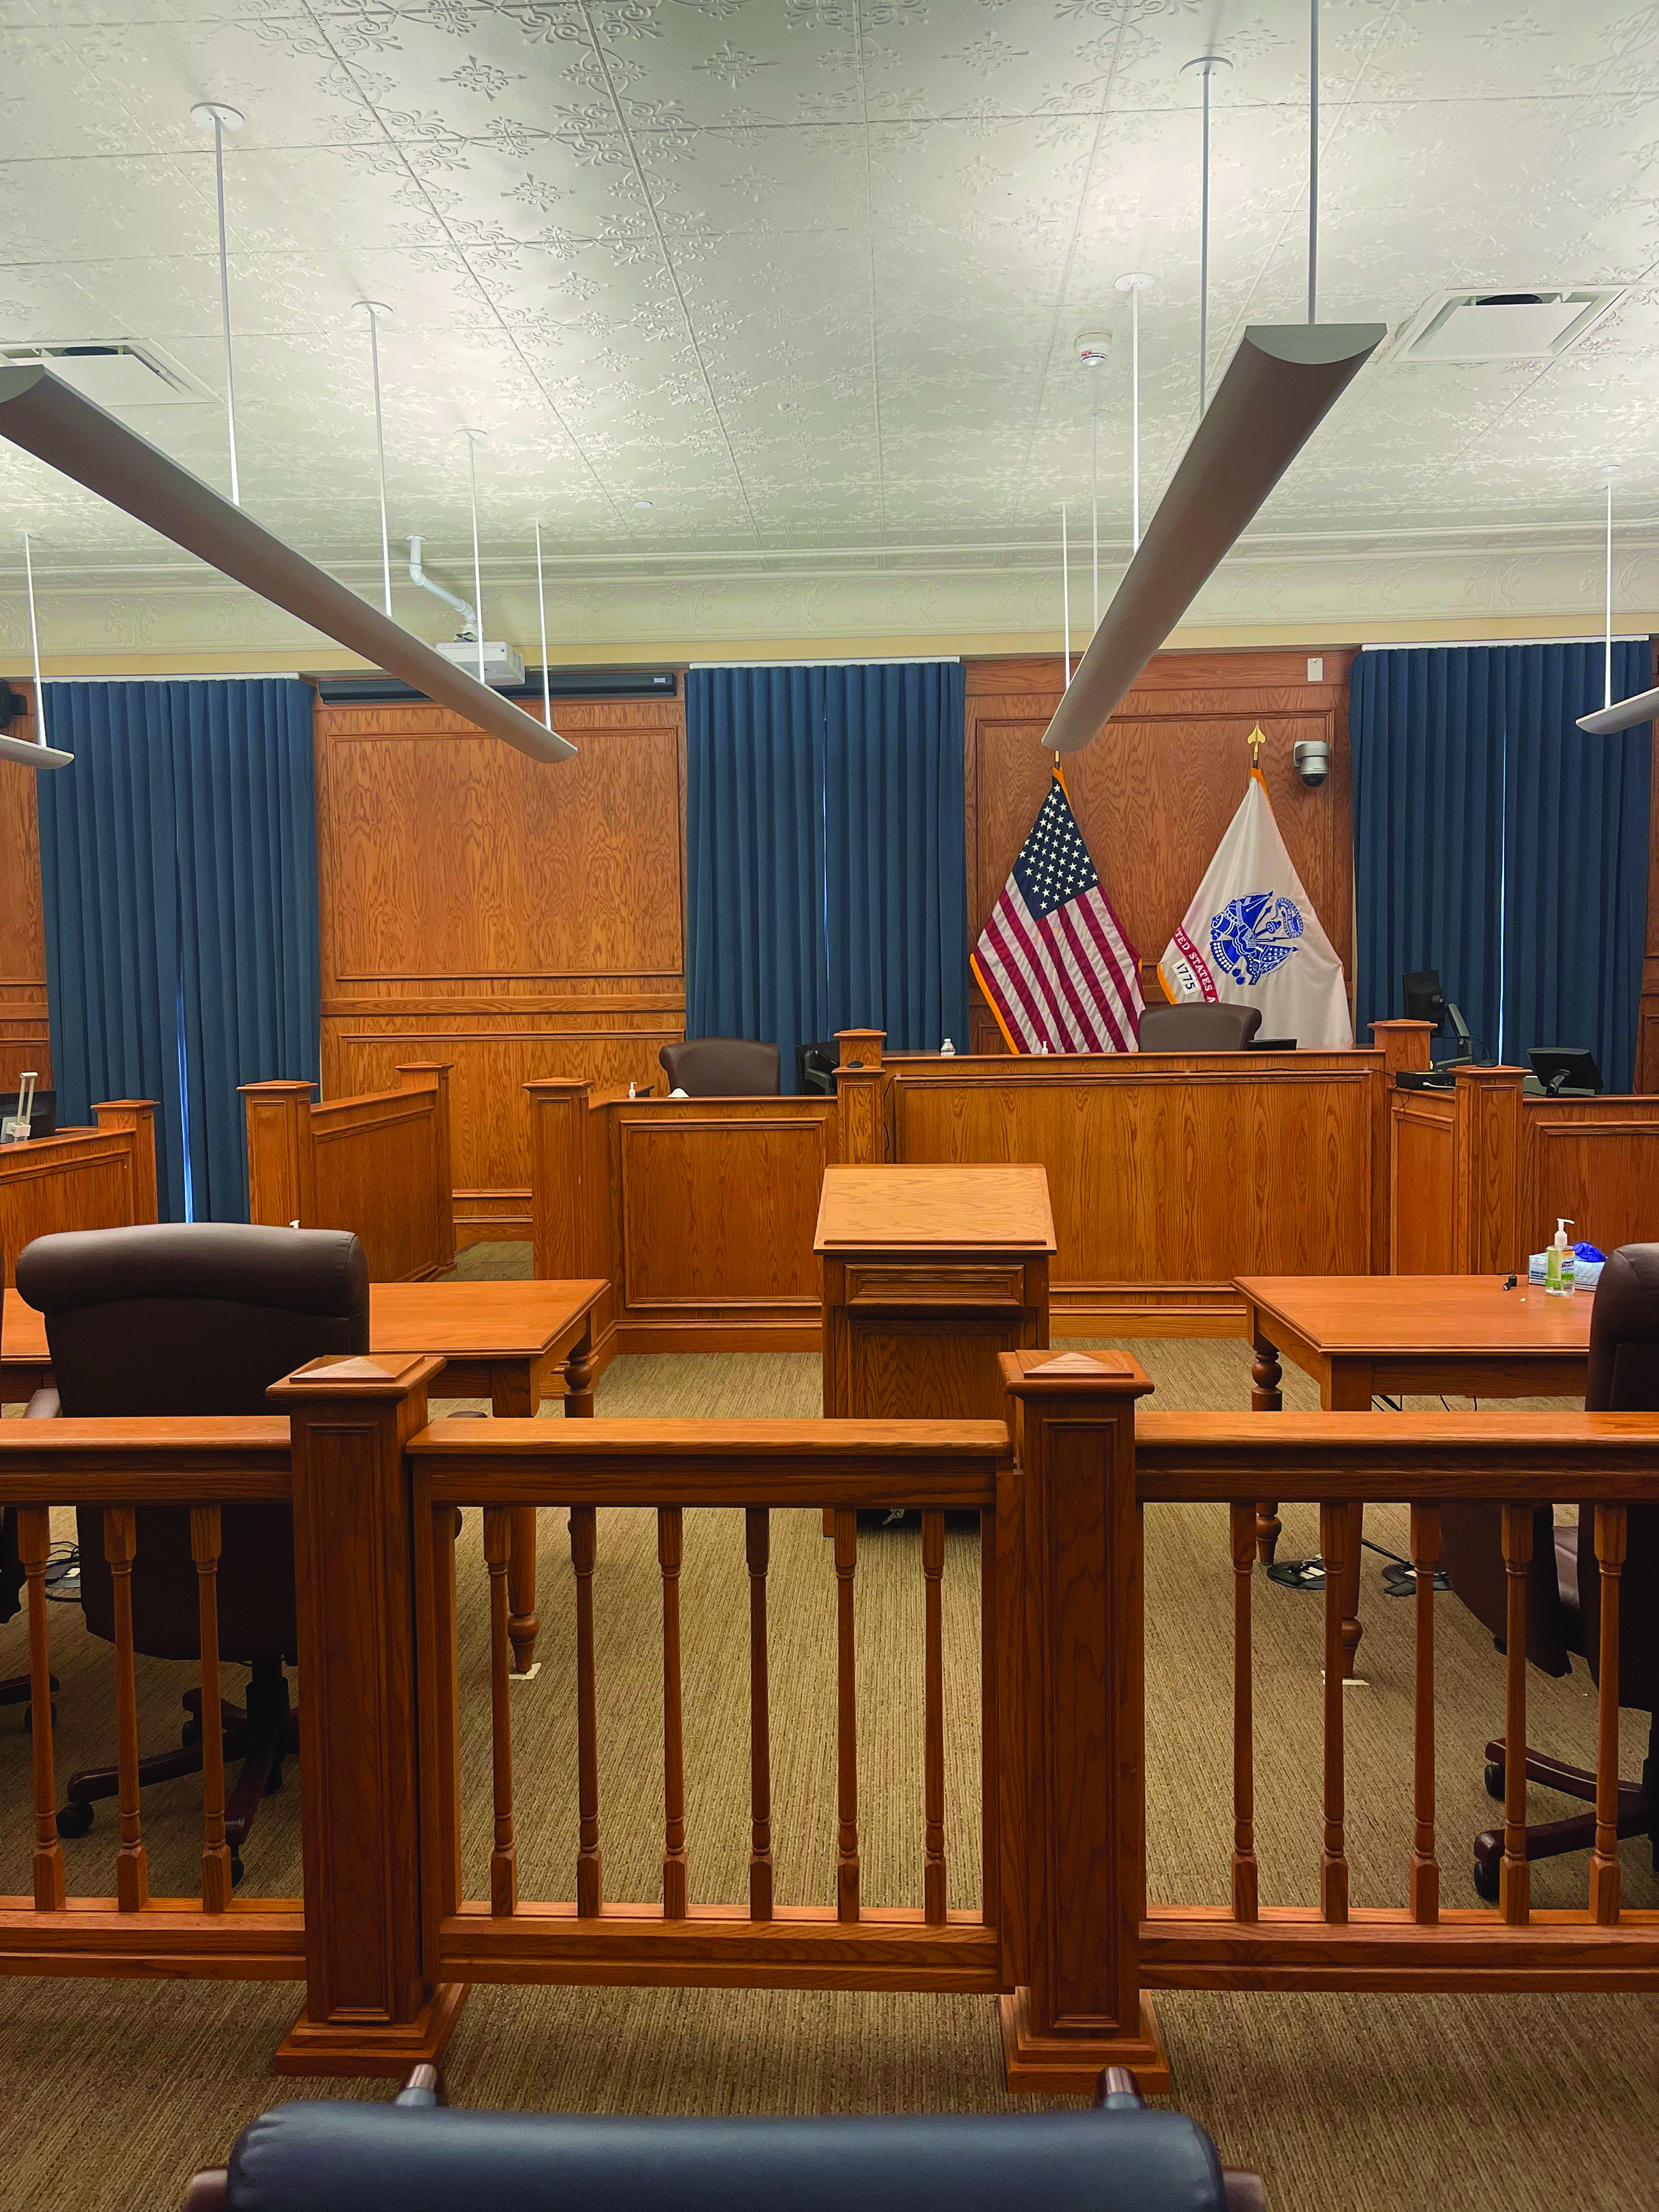 The courtroom in Fort Riley, Kansas, sits in the
        U.S. Army’s 3d Judicial Circuit. (Credit: Bethany
        Boutte, Fort Riley, Kansas)